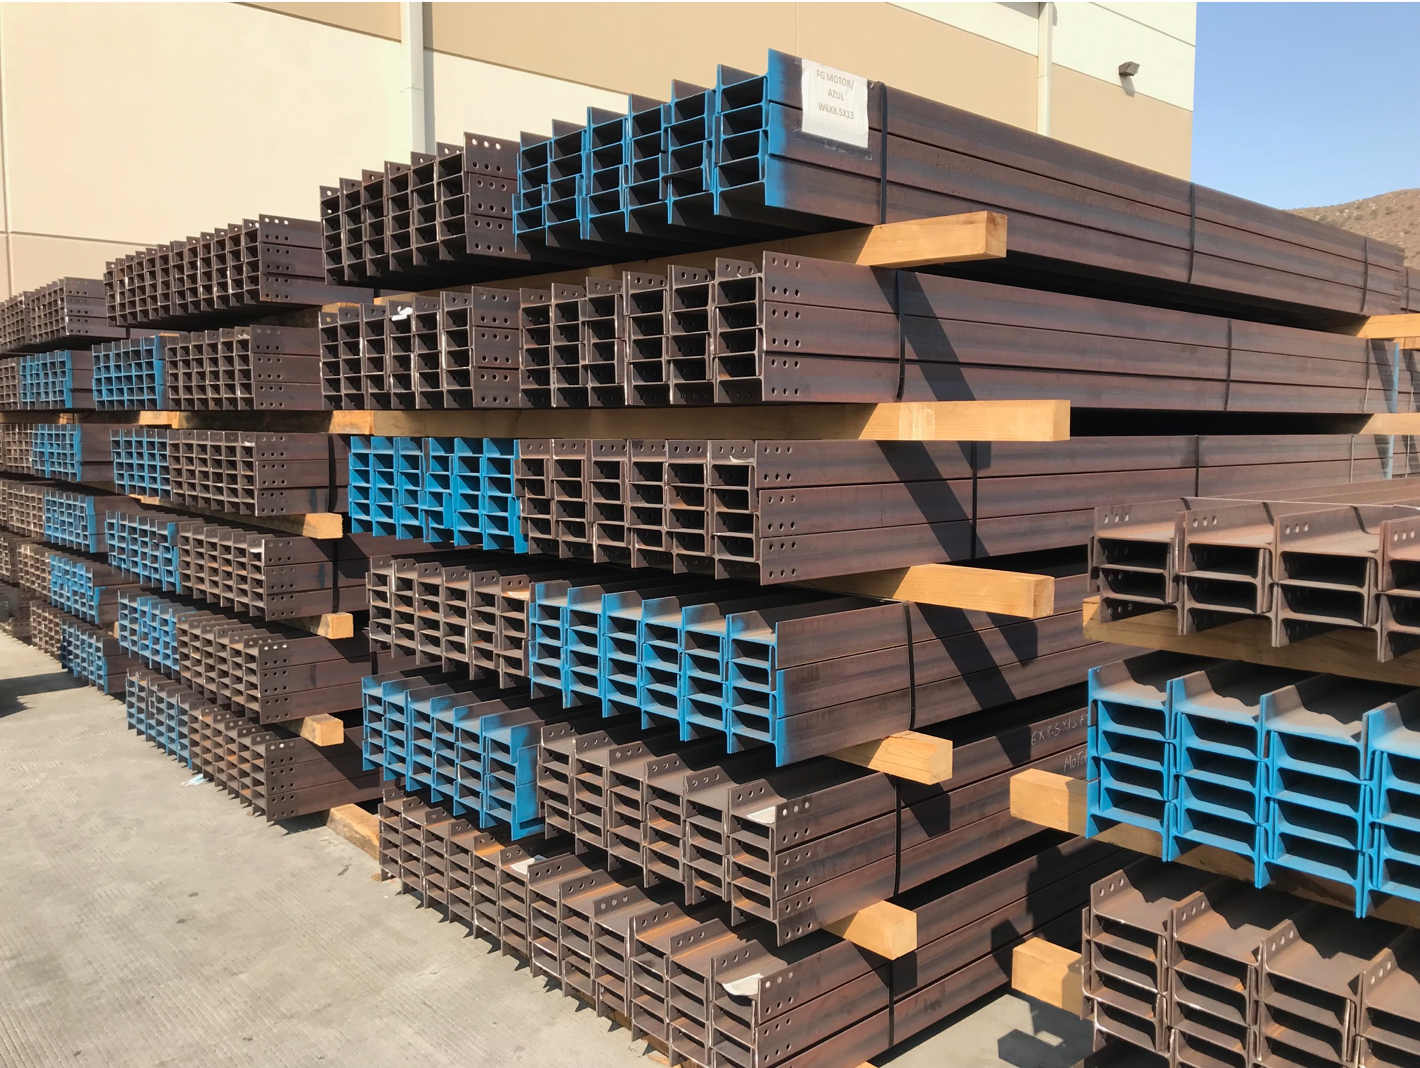 Contact Unimacts for pricing, availability, and lead times for steel beams.